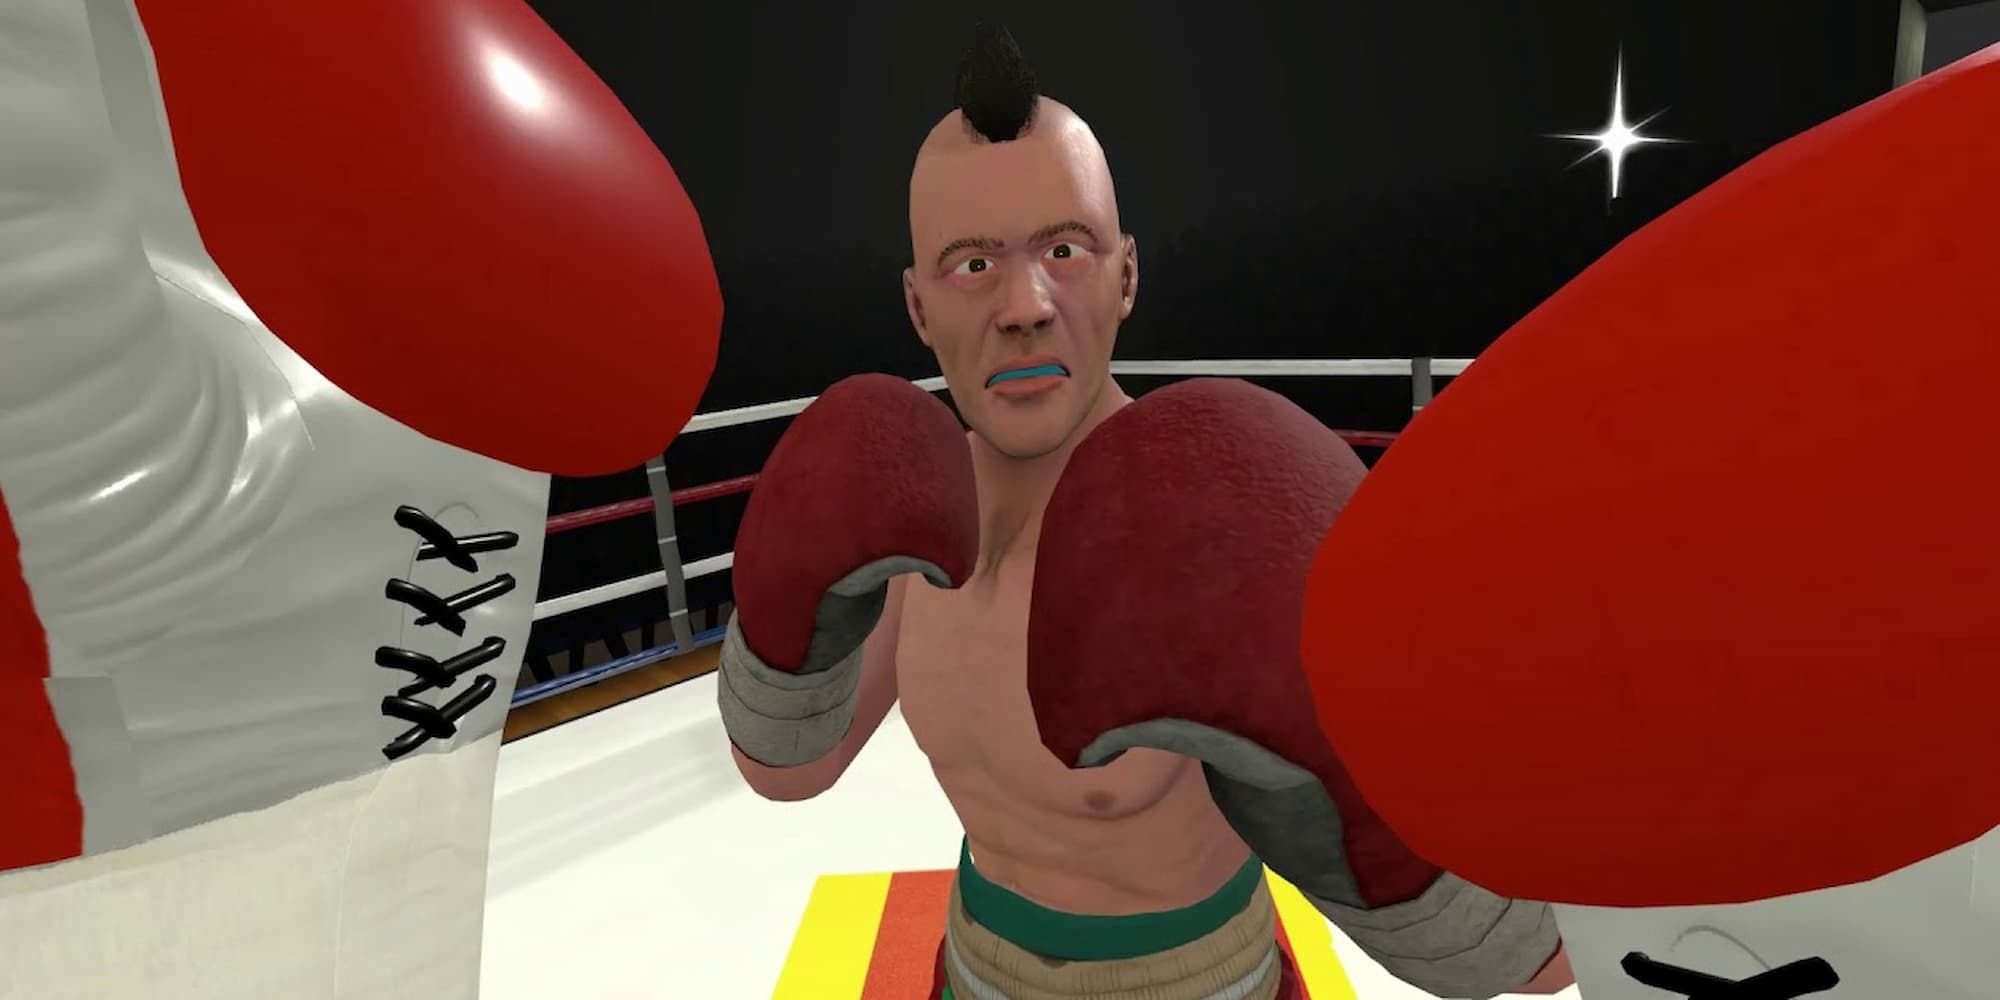 The player raises the gloves to block the opponent's blows in The Thrill Of The Fight.